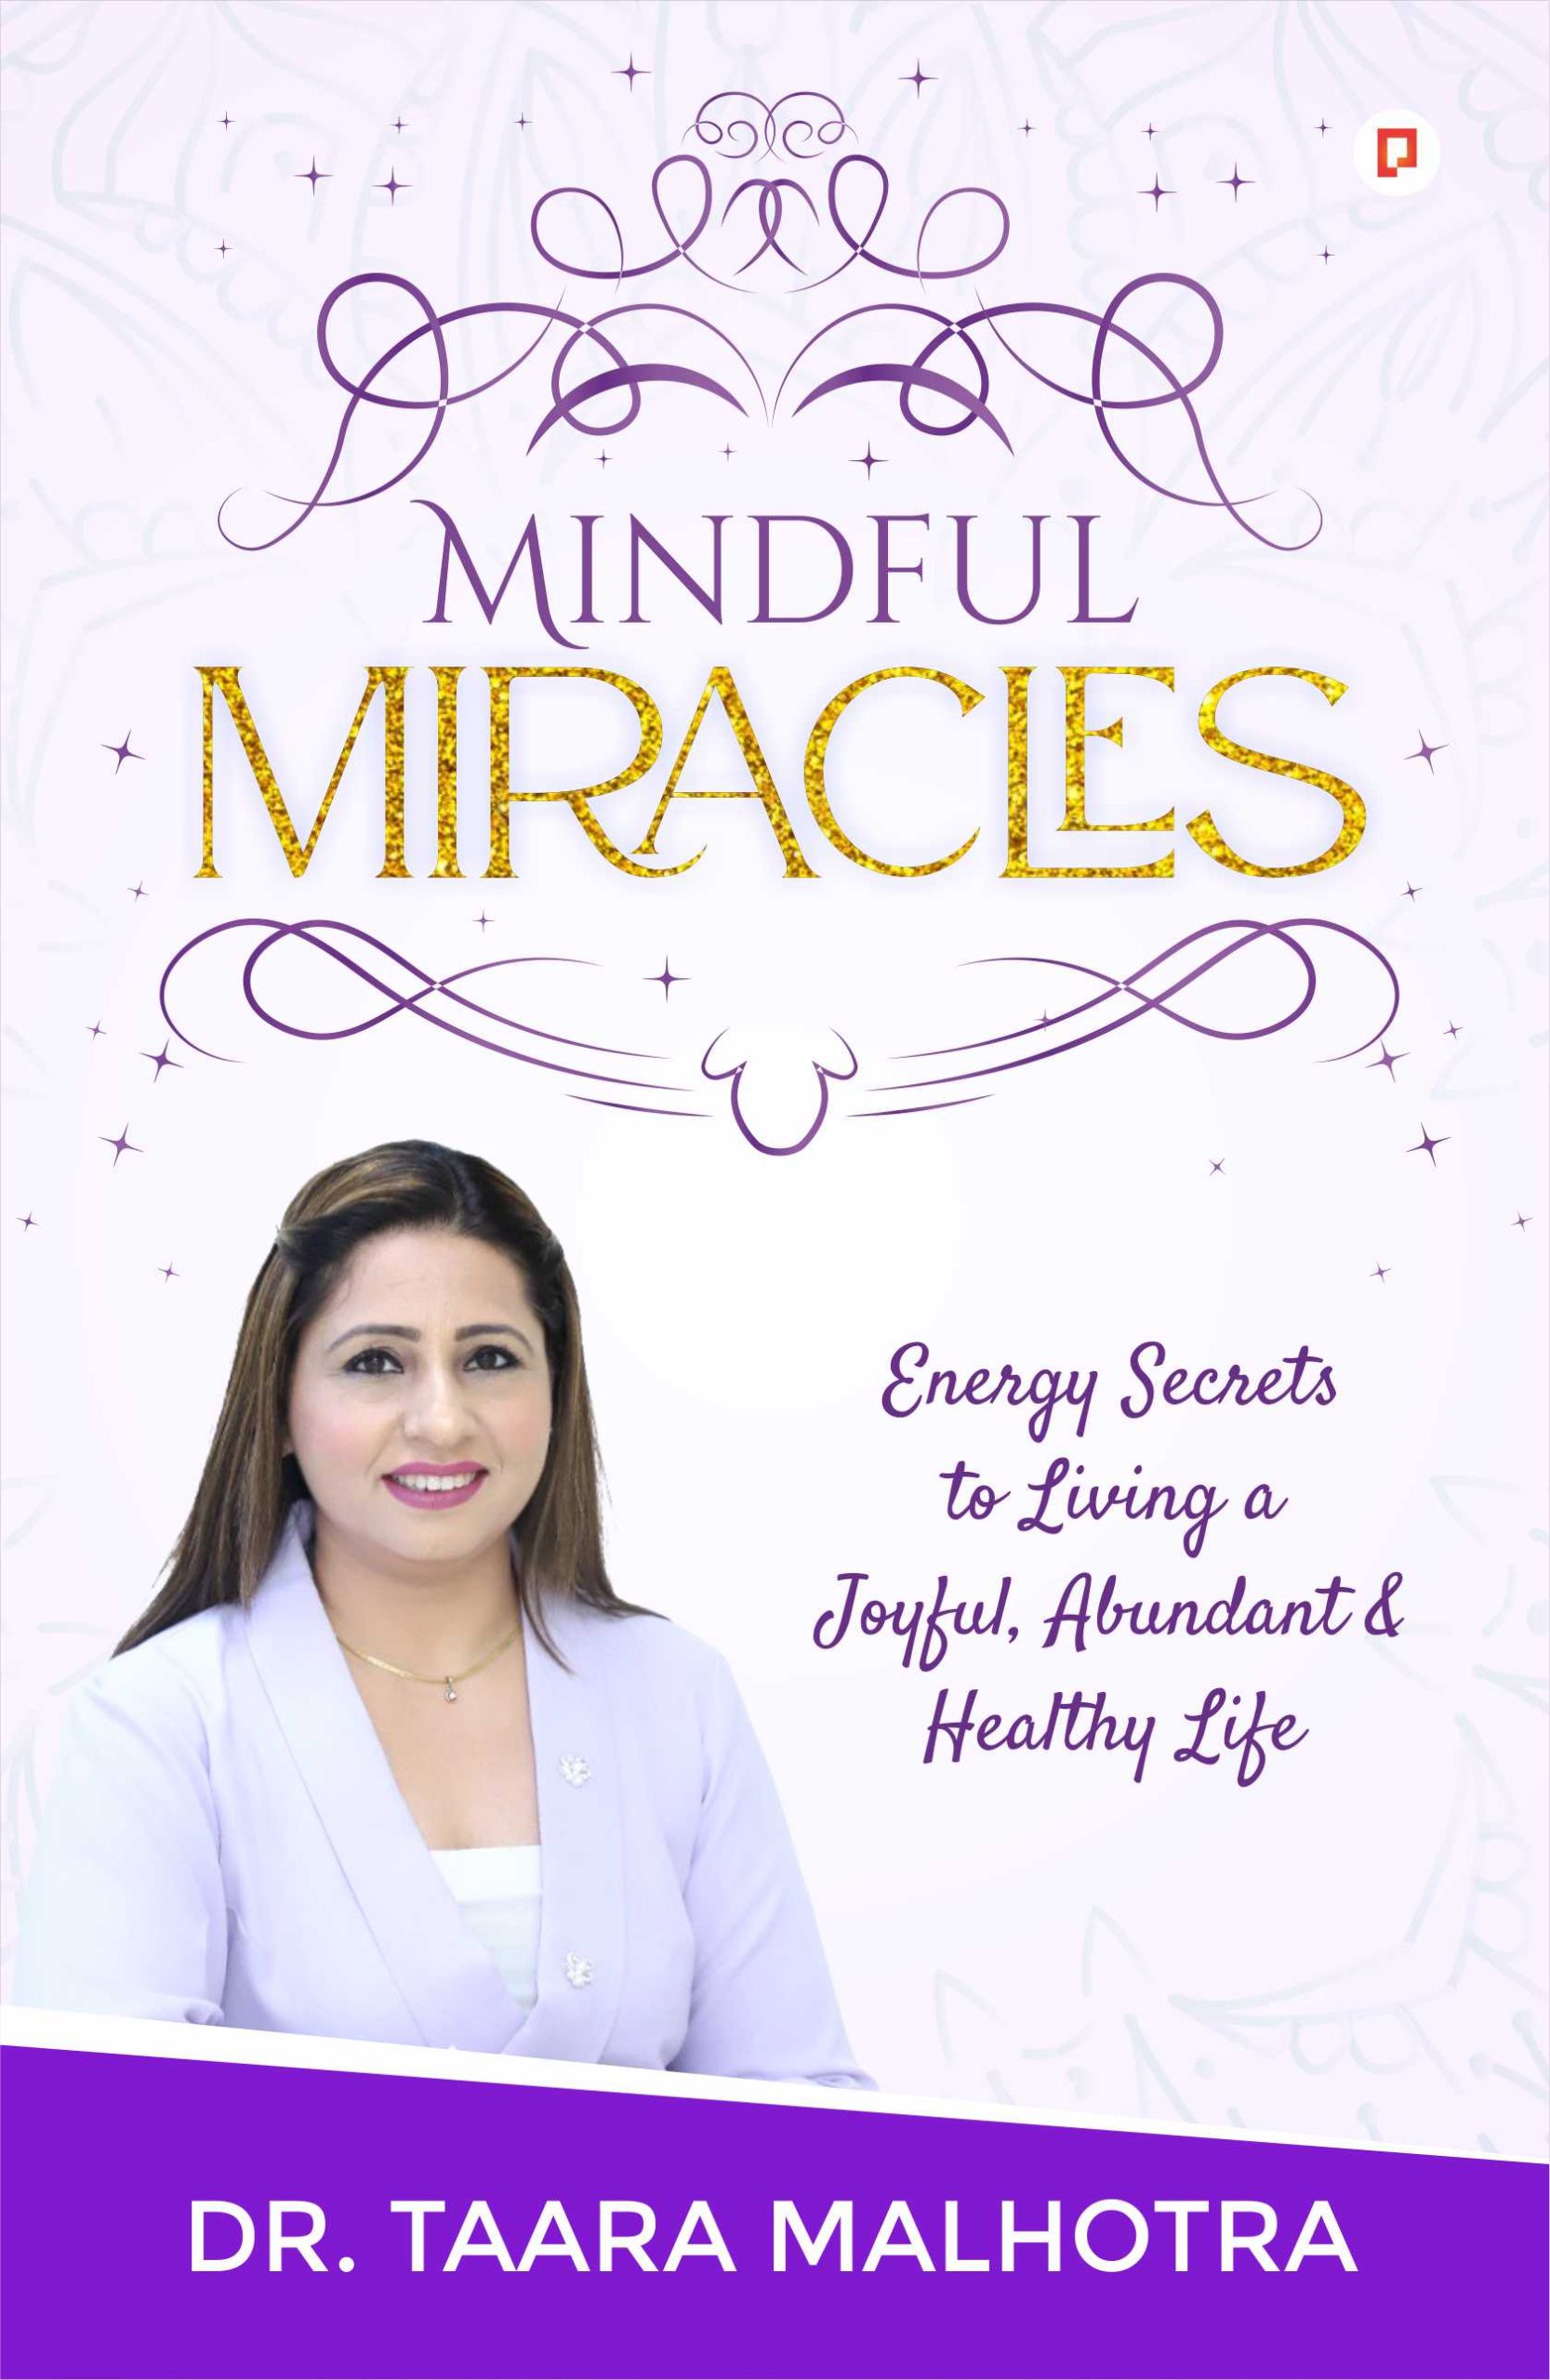 Mindful Miracles by Dr. Taara Malhotra